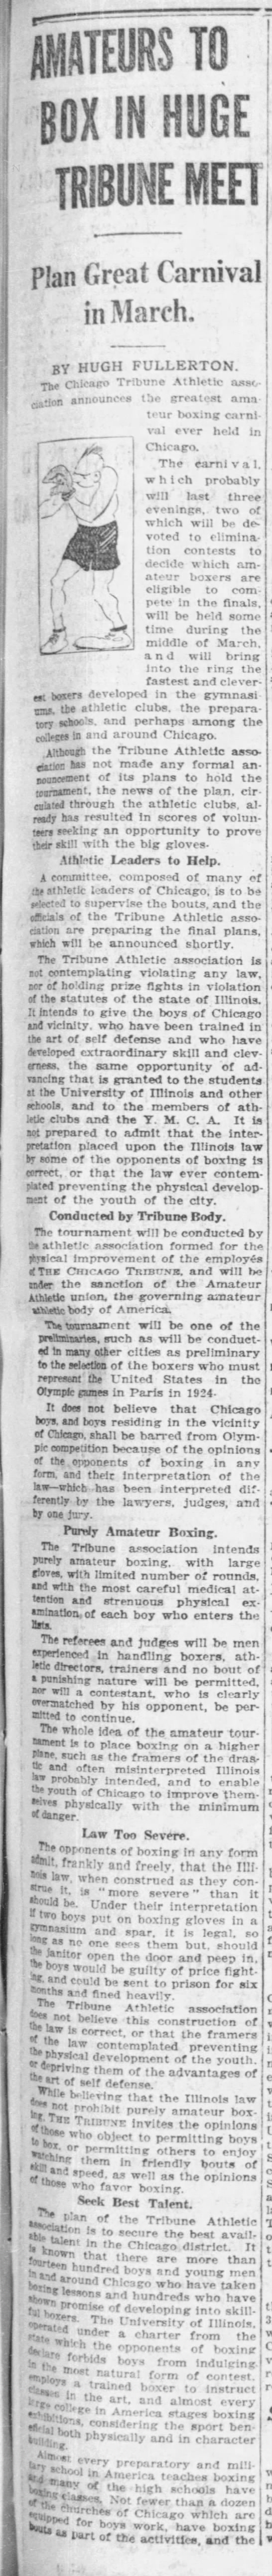 The Chicago Tribune officially announces the tournament - 